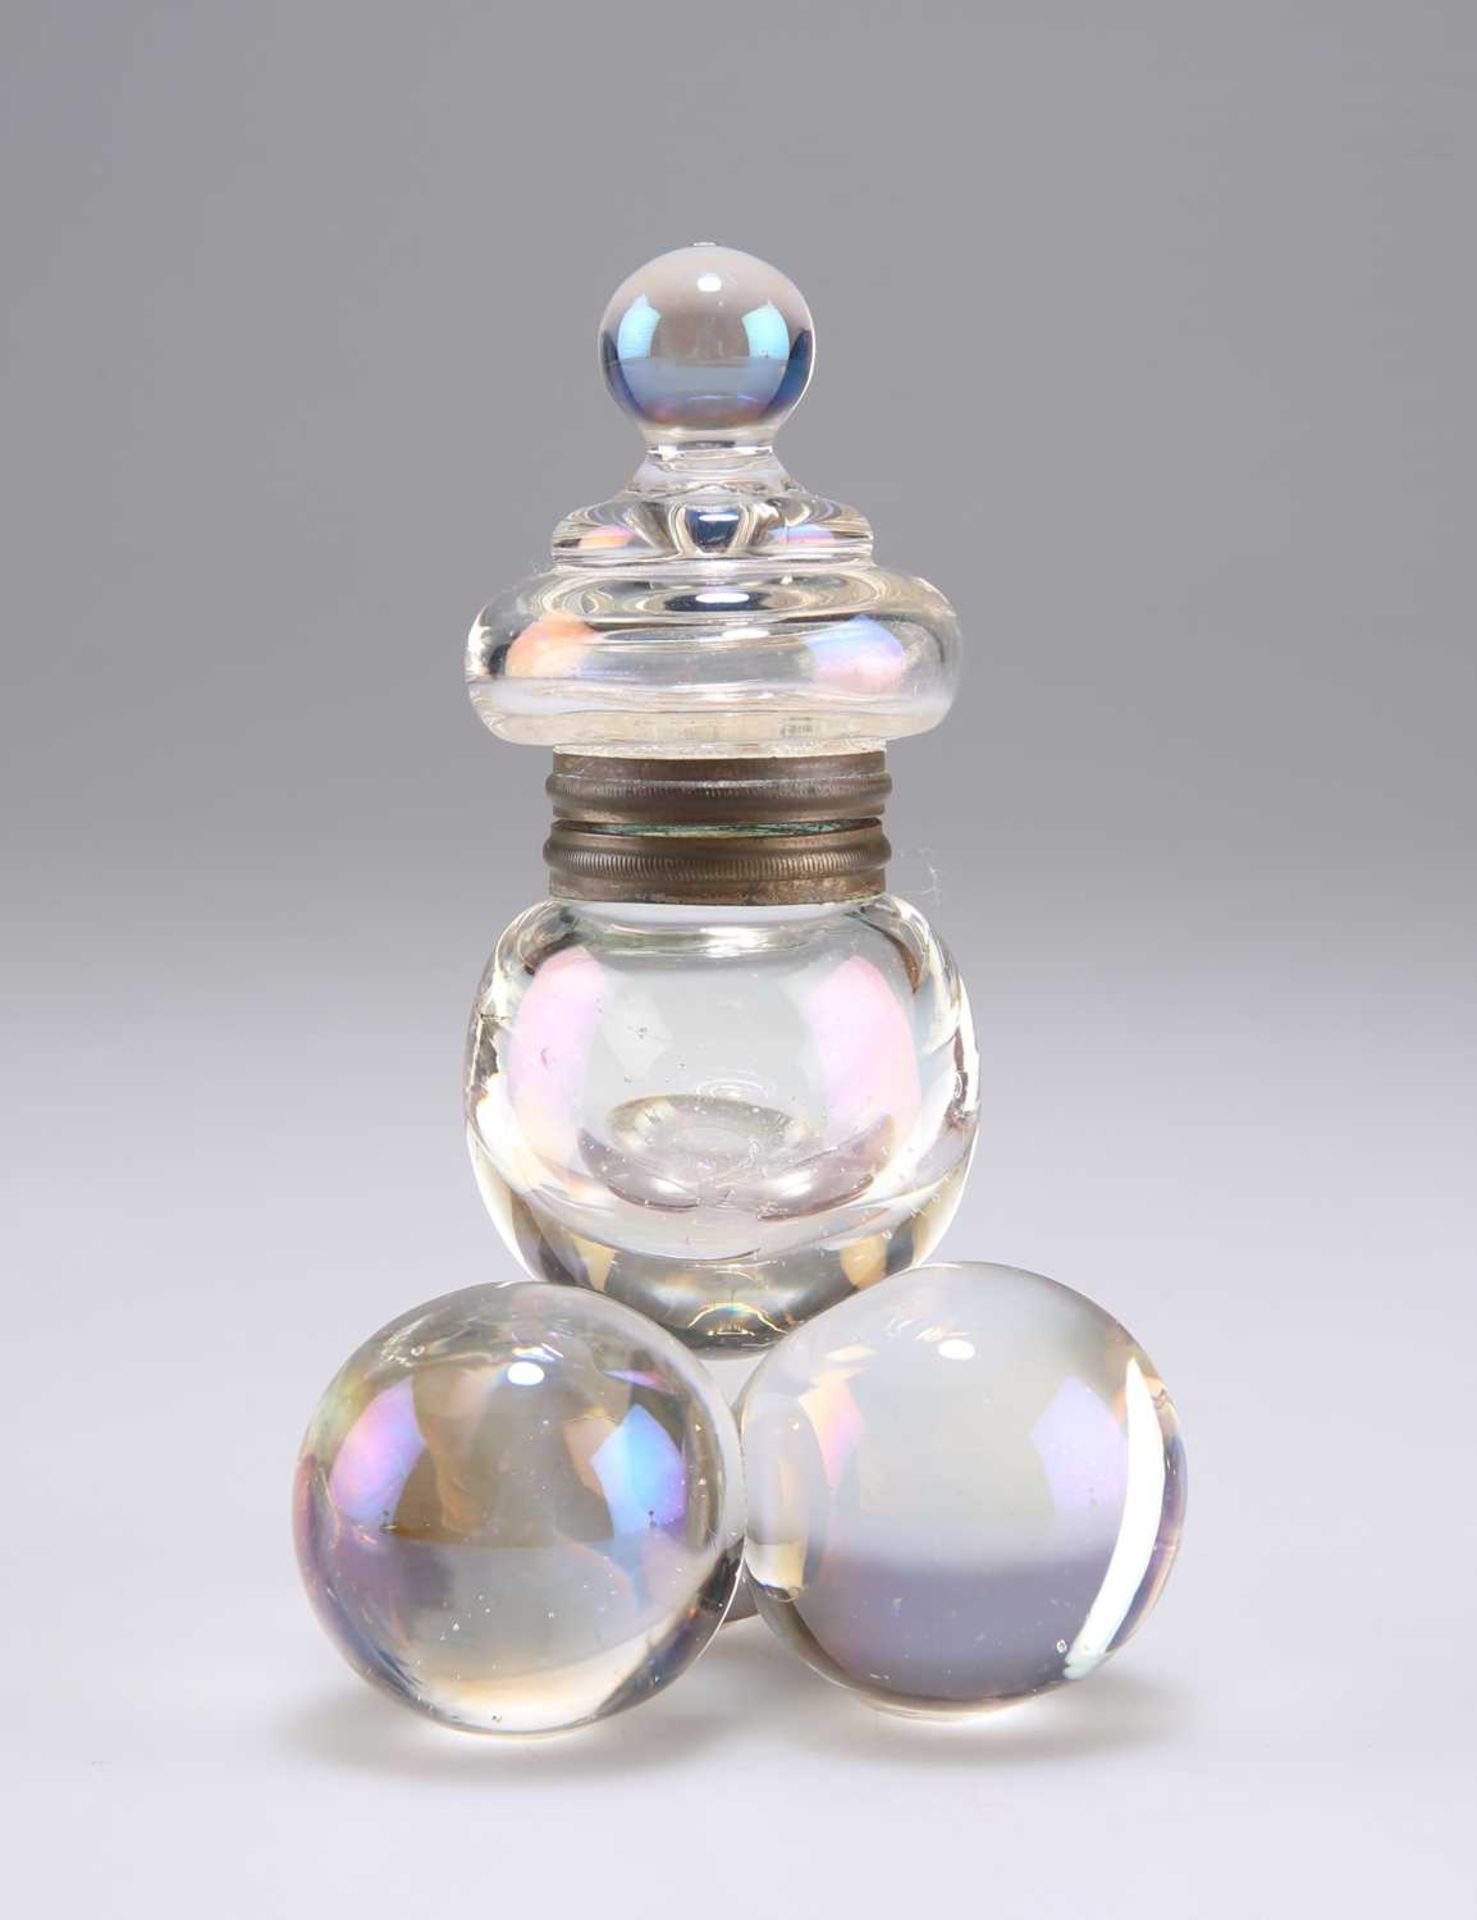 A HARRACH 'SOAP BUBBLES' GLASS INKWELL, LATE 19TH CENTURY - Image 2 of 2